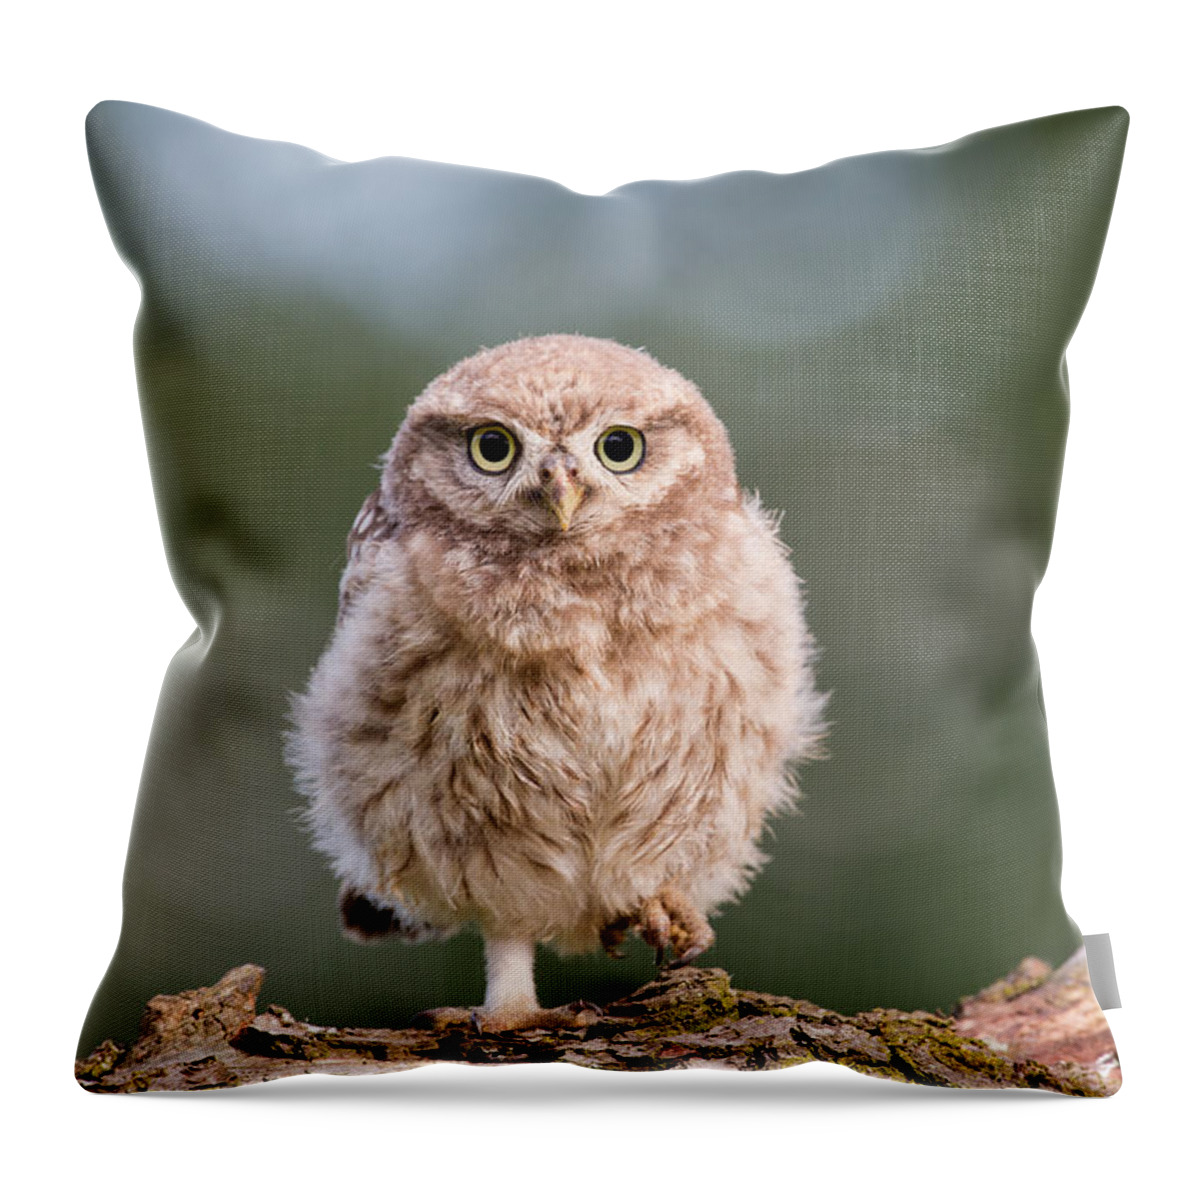 Owl Throw Pillow featuring the photograph Little Owl Chick by Roeselien Raimond